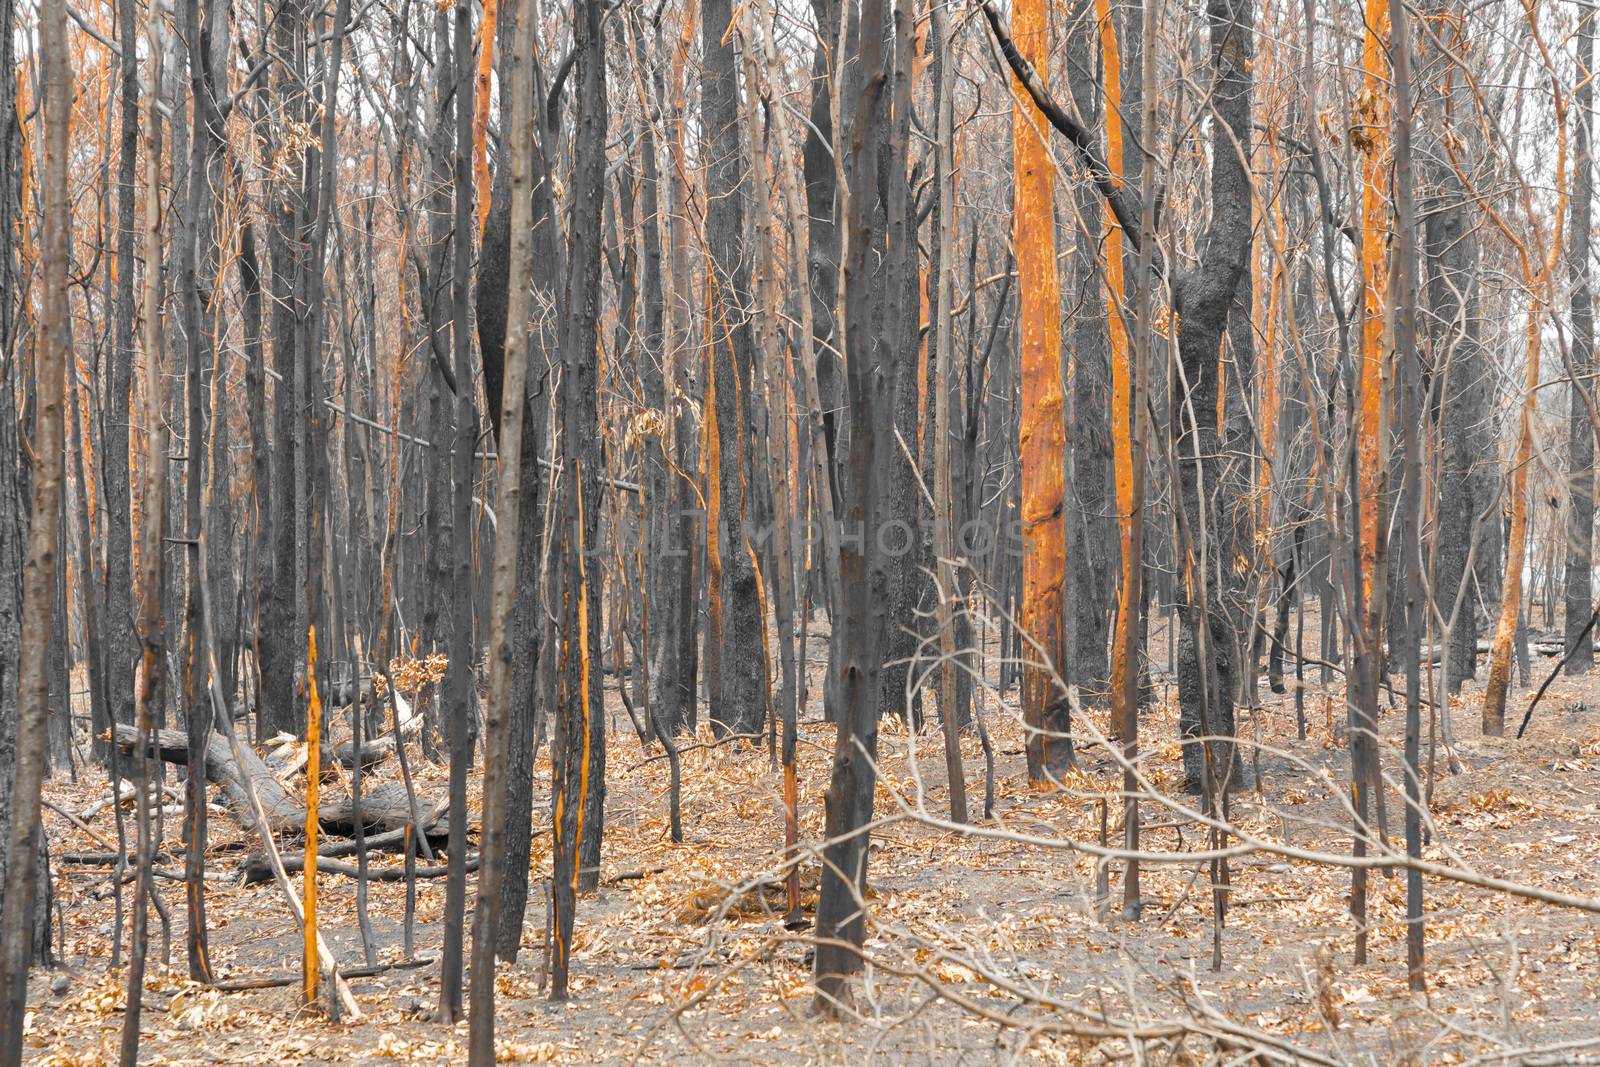 Gum trees burnt by severe bushfire in The Blue Mountains in Australia by WittkePhotos